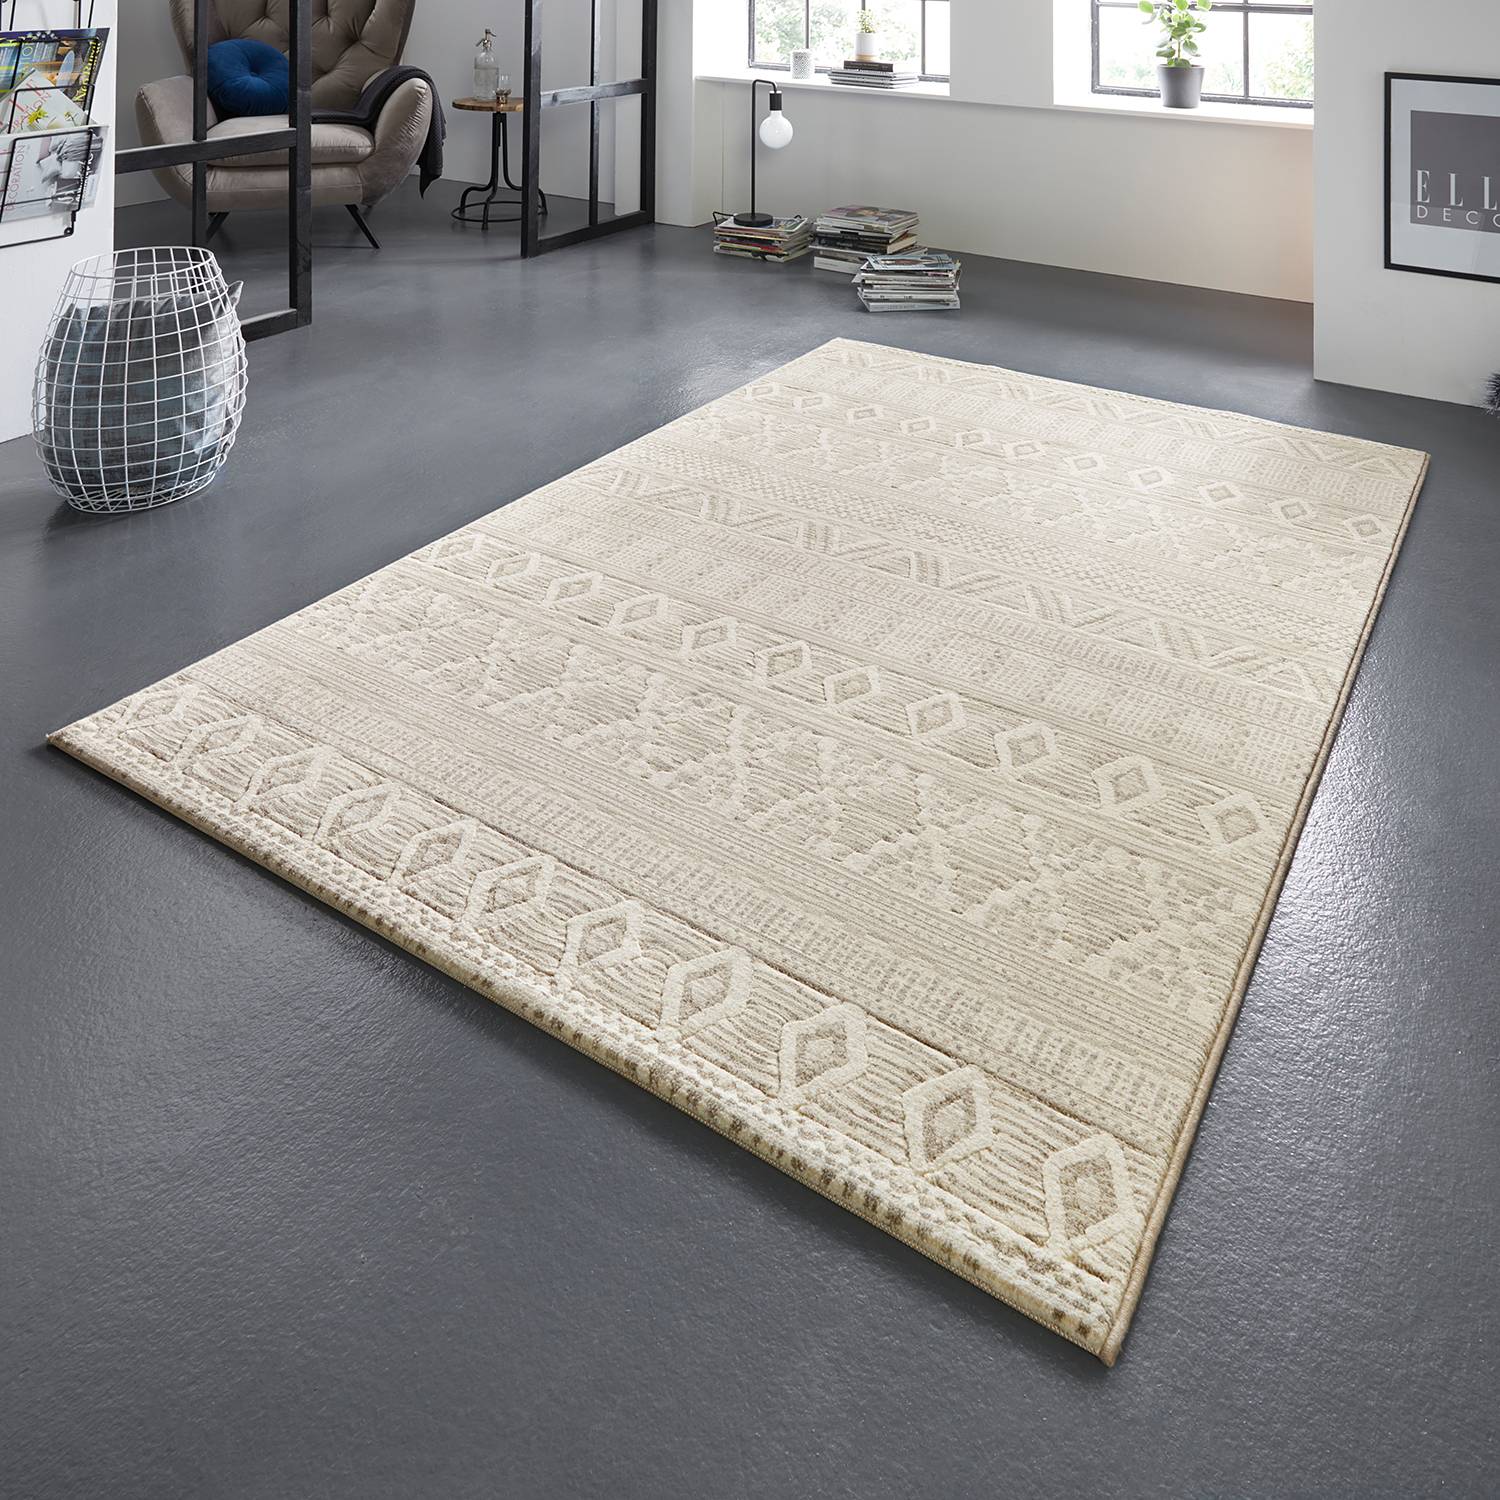 Image of Tapis Roanne 000000001000168464